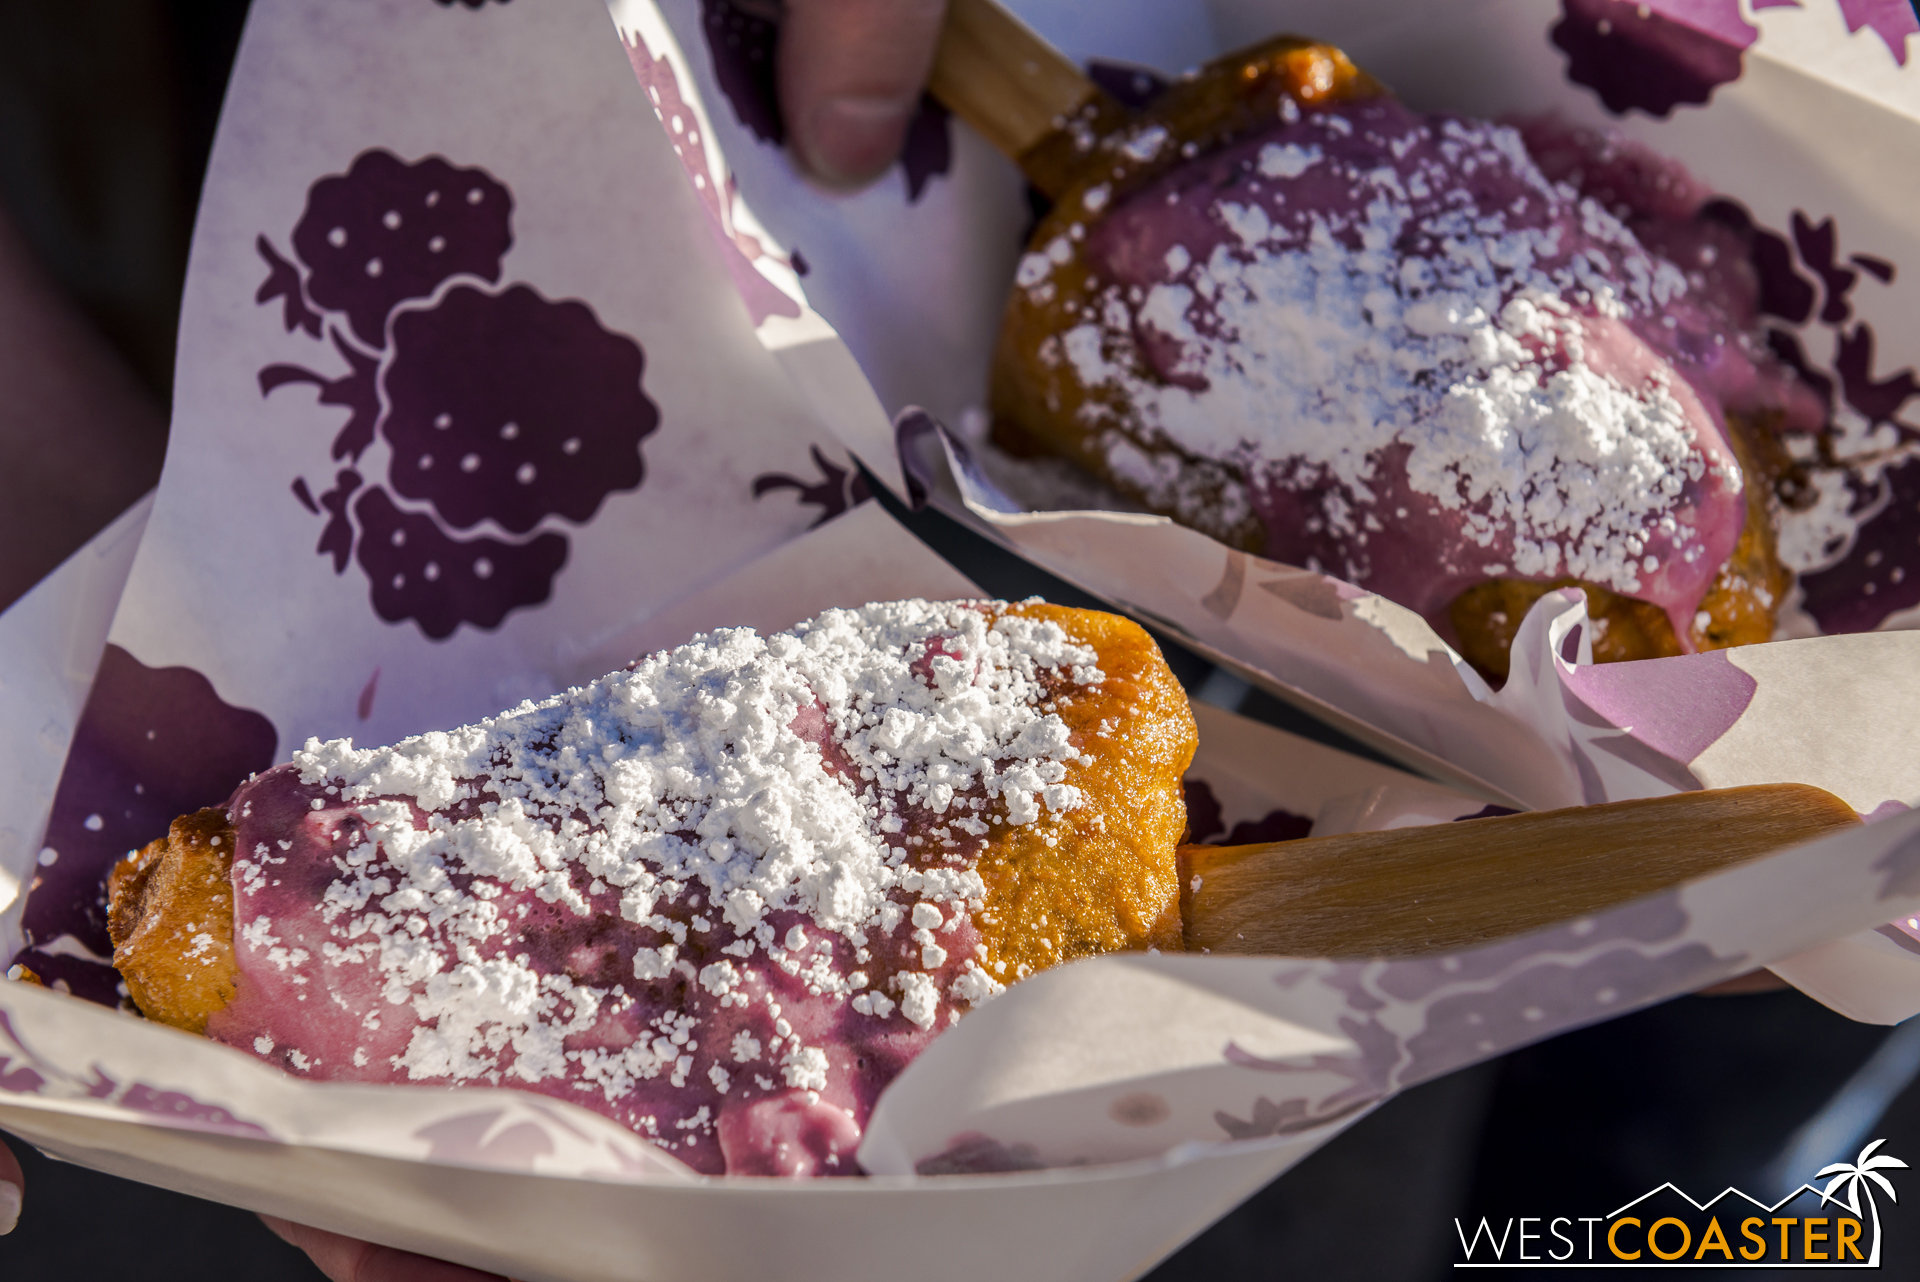  The Fun Stick--a deep fried cheesecake on a stick with boysenberry jam and powdered sugar--is instant, delicious diabetes. 